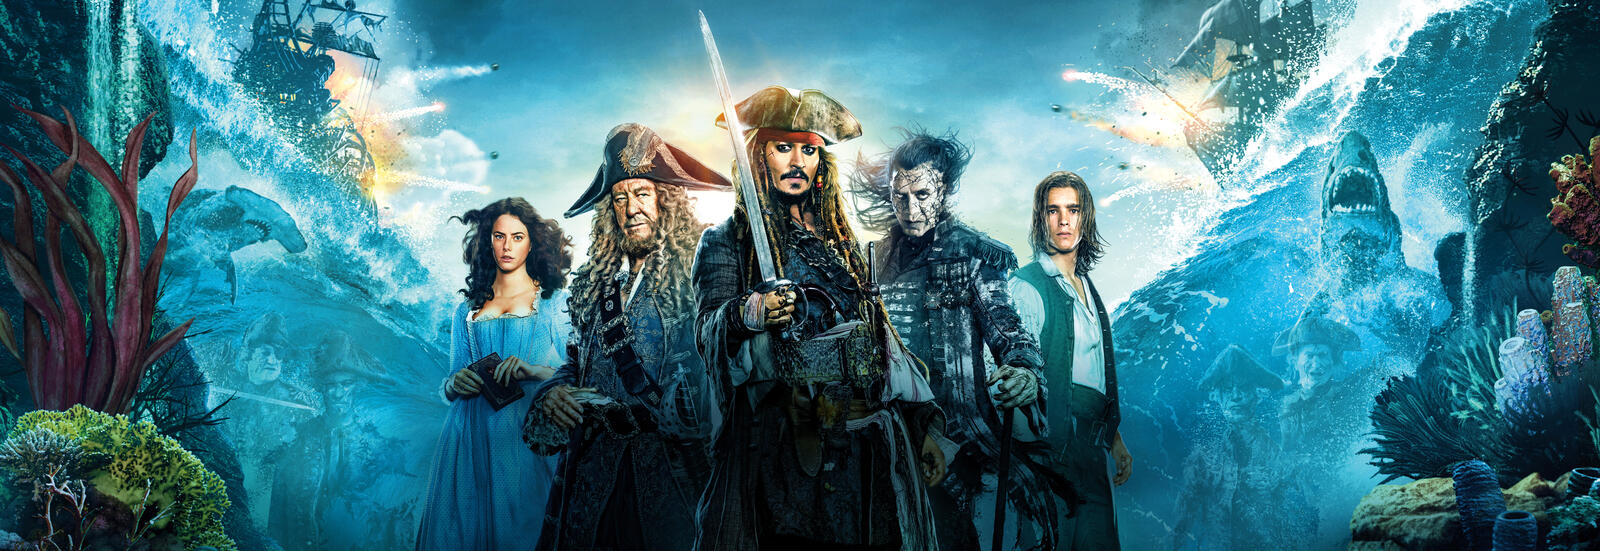 Wallpapers Pirates of the Caribbean: Dead men tell no tales film action on the desktop